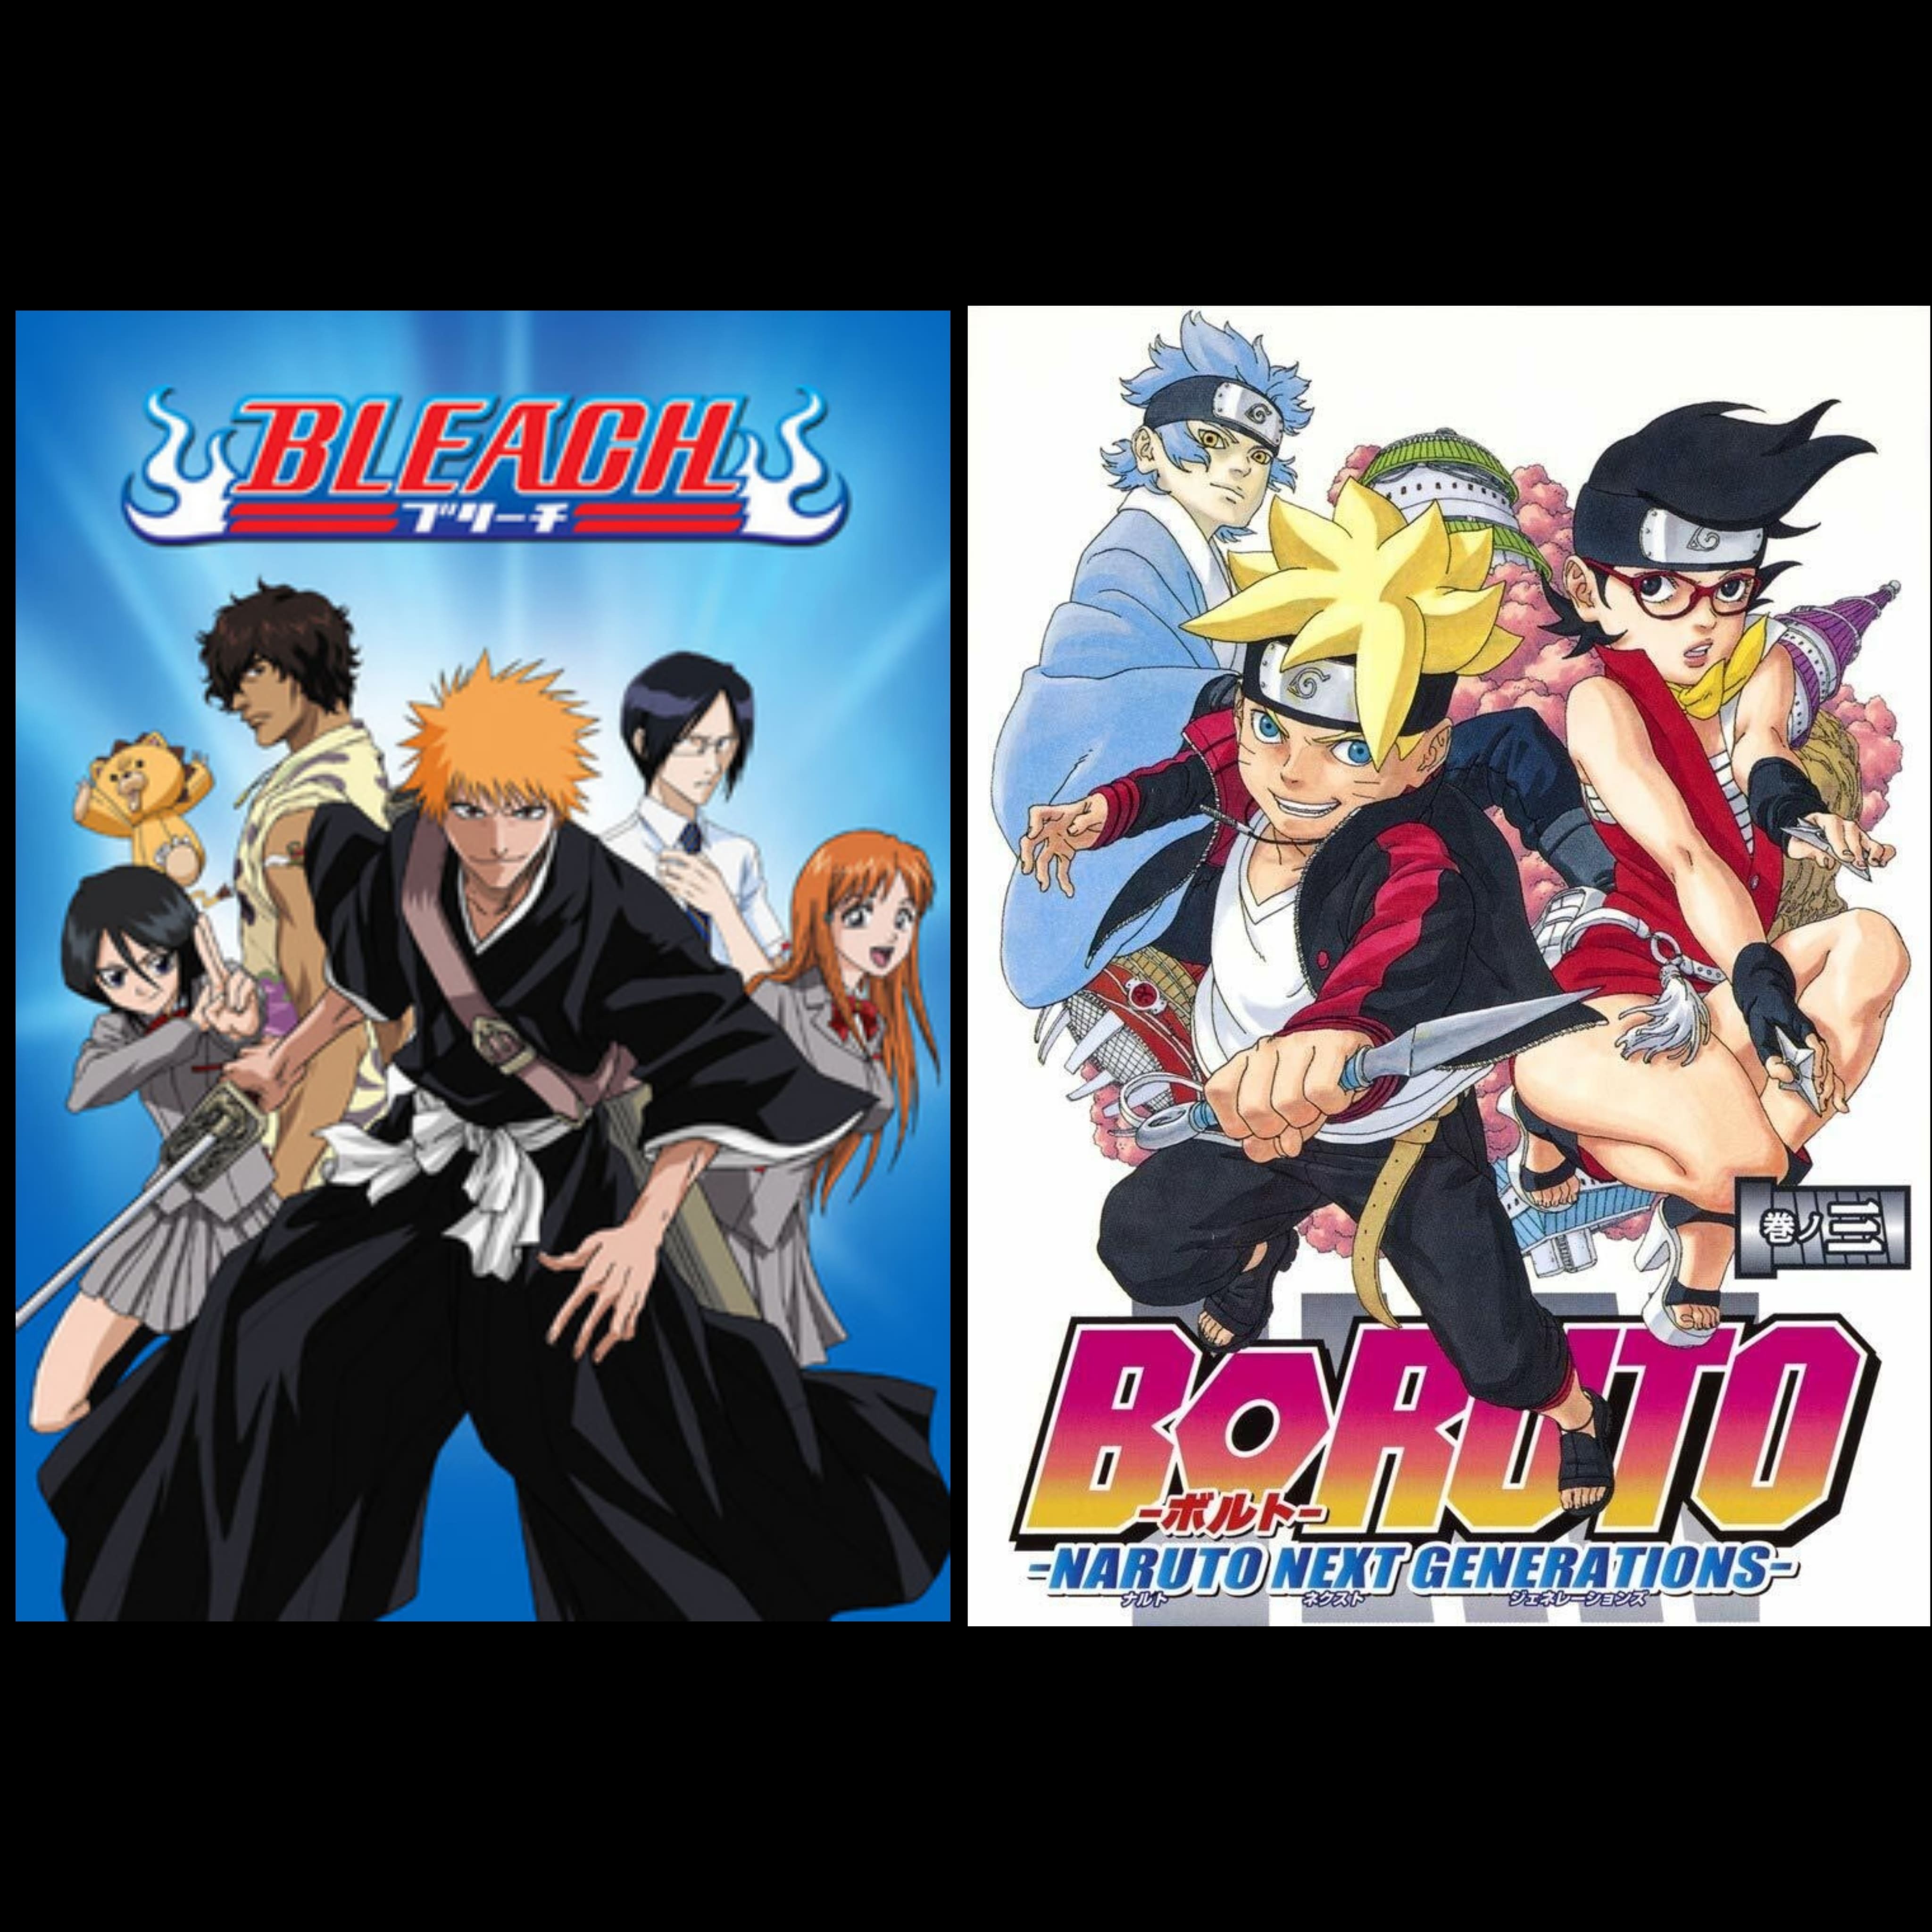 Boruto or Bleach - Which manga is better? - Gen. Discussion - Comic Vine